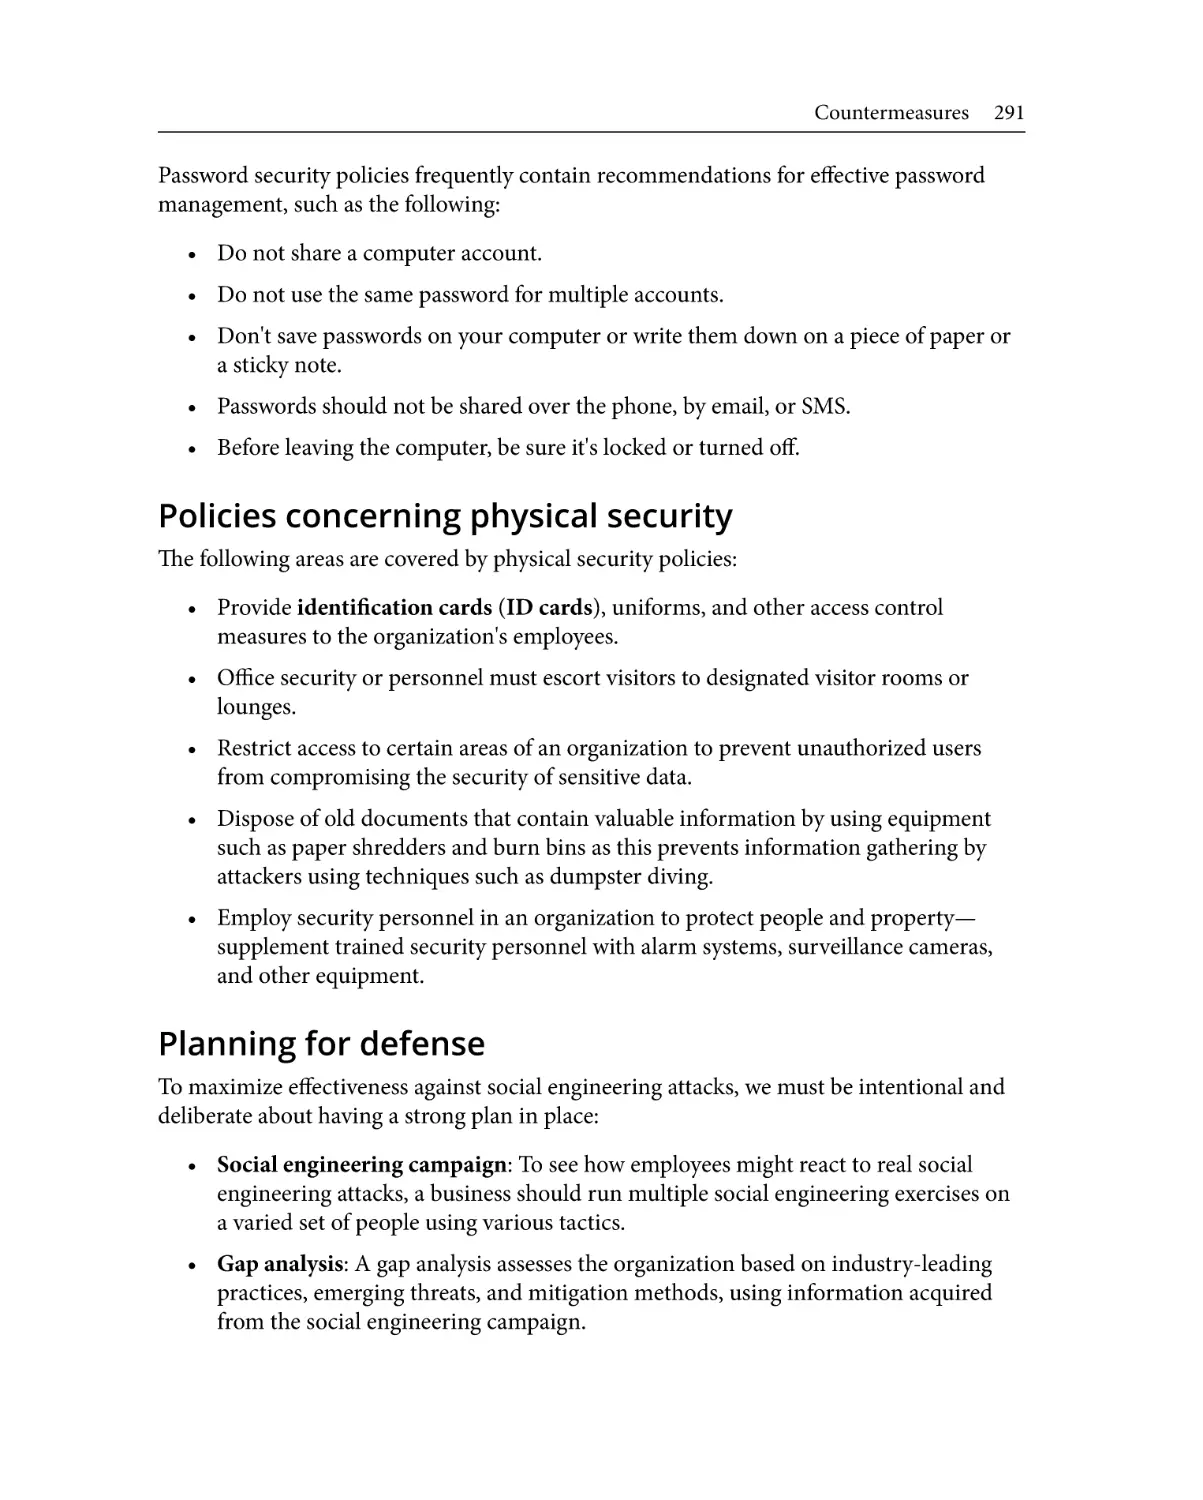 Policies concerning physical security
Planning for defense